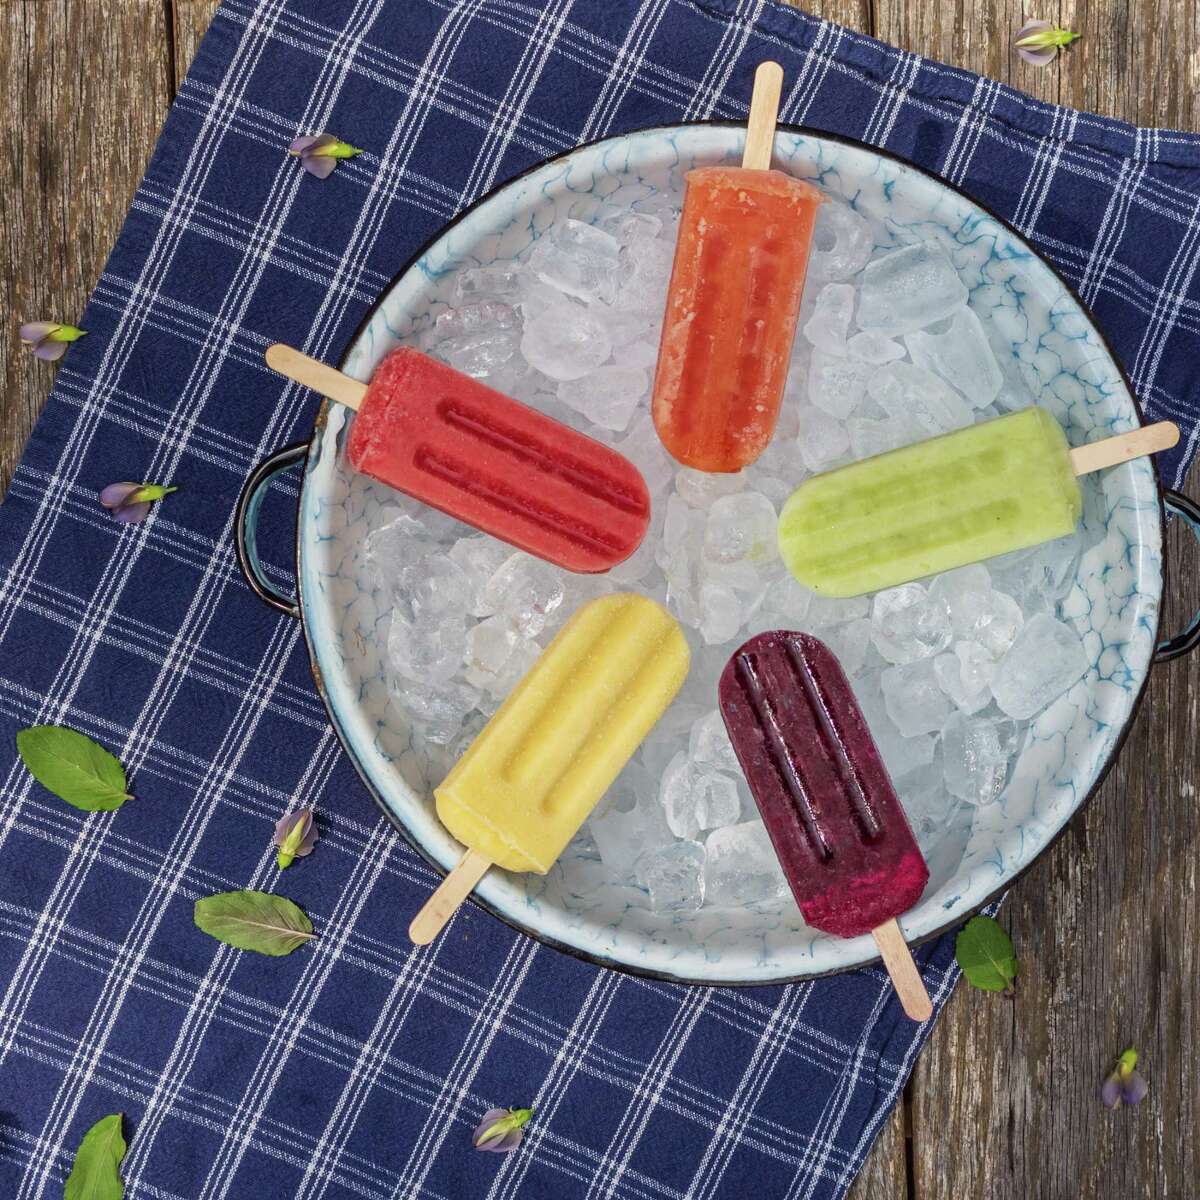 Bees Knees Ice Pops sells their inventive ice pops at farmers markets around Fairfield County.